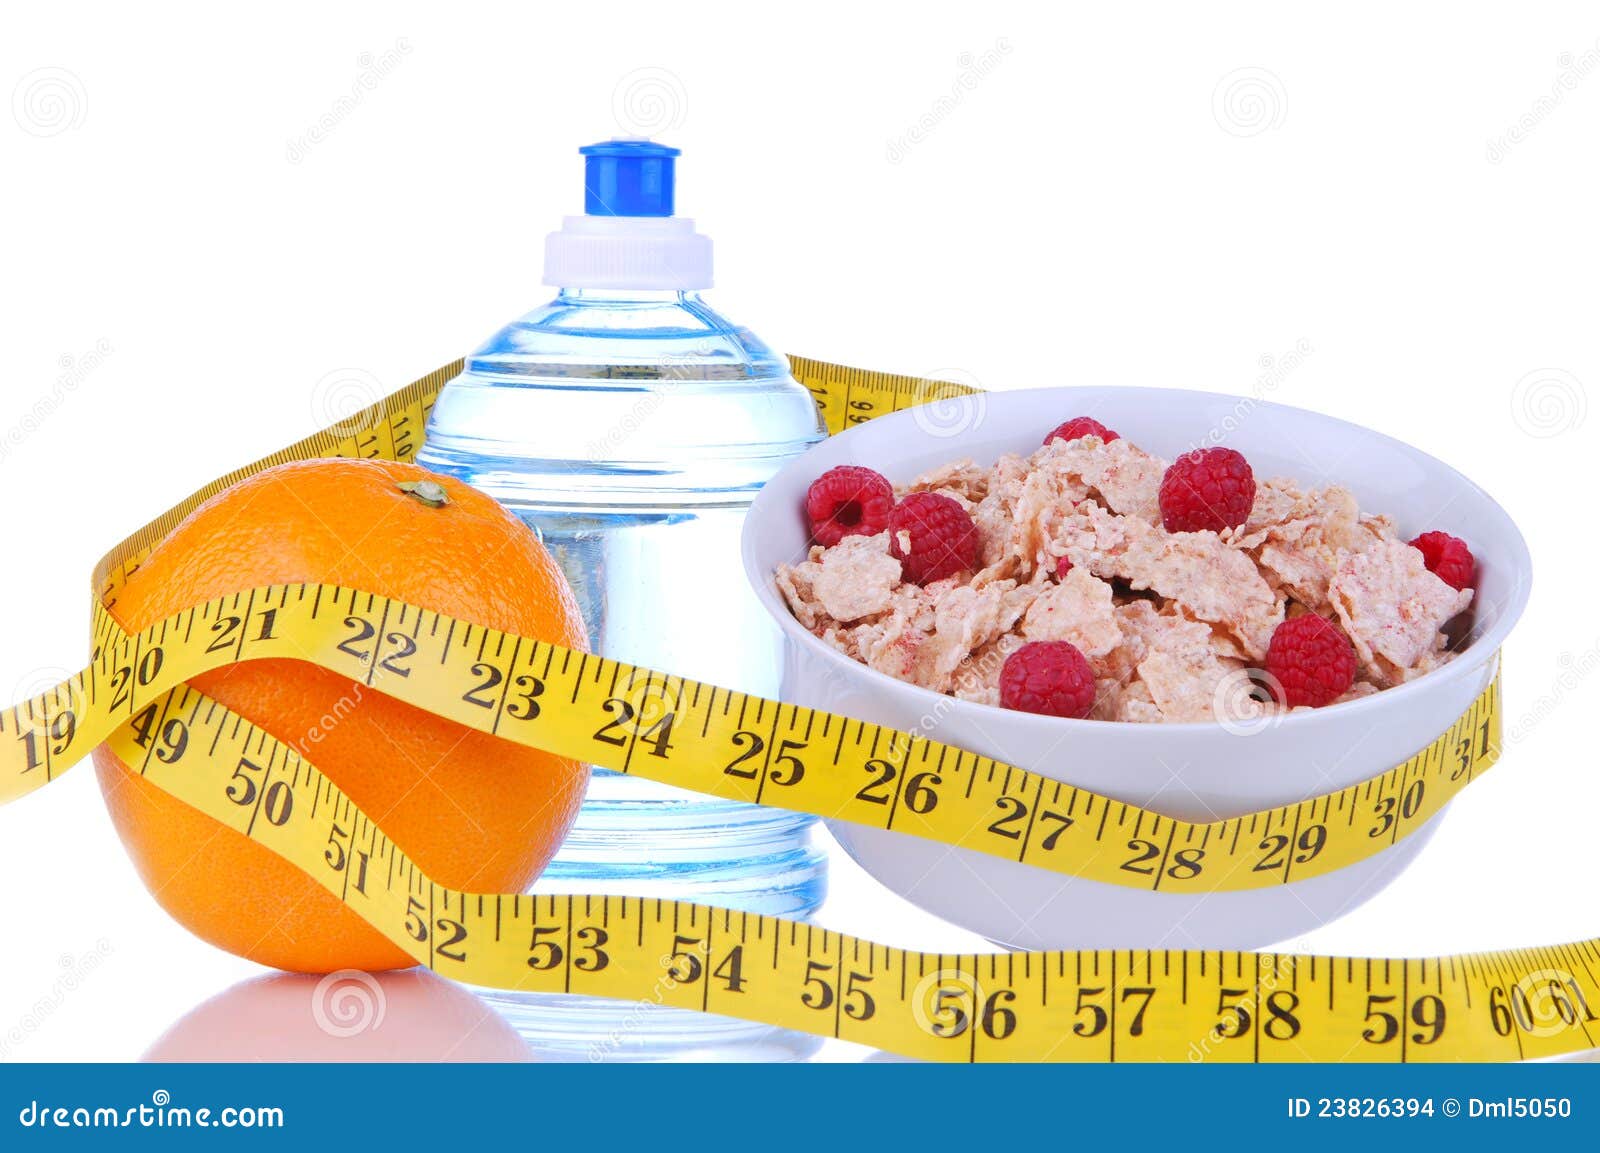 Diet Weight Loss Food Breakfast Tape Measure Stock Images - Image ...